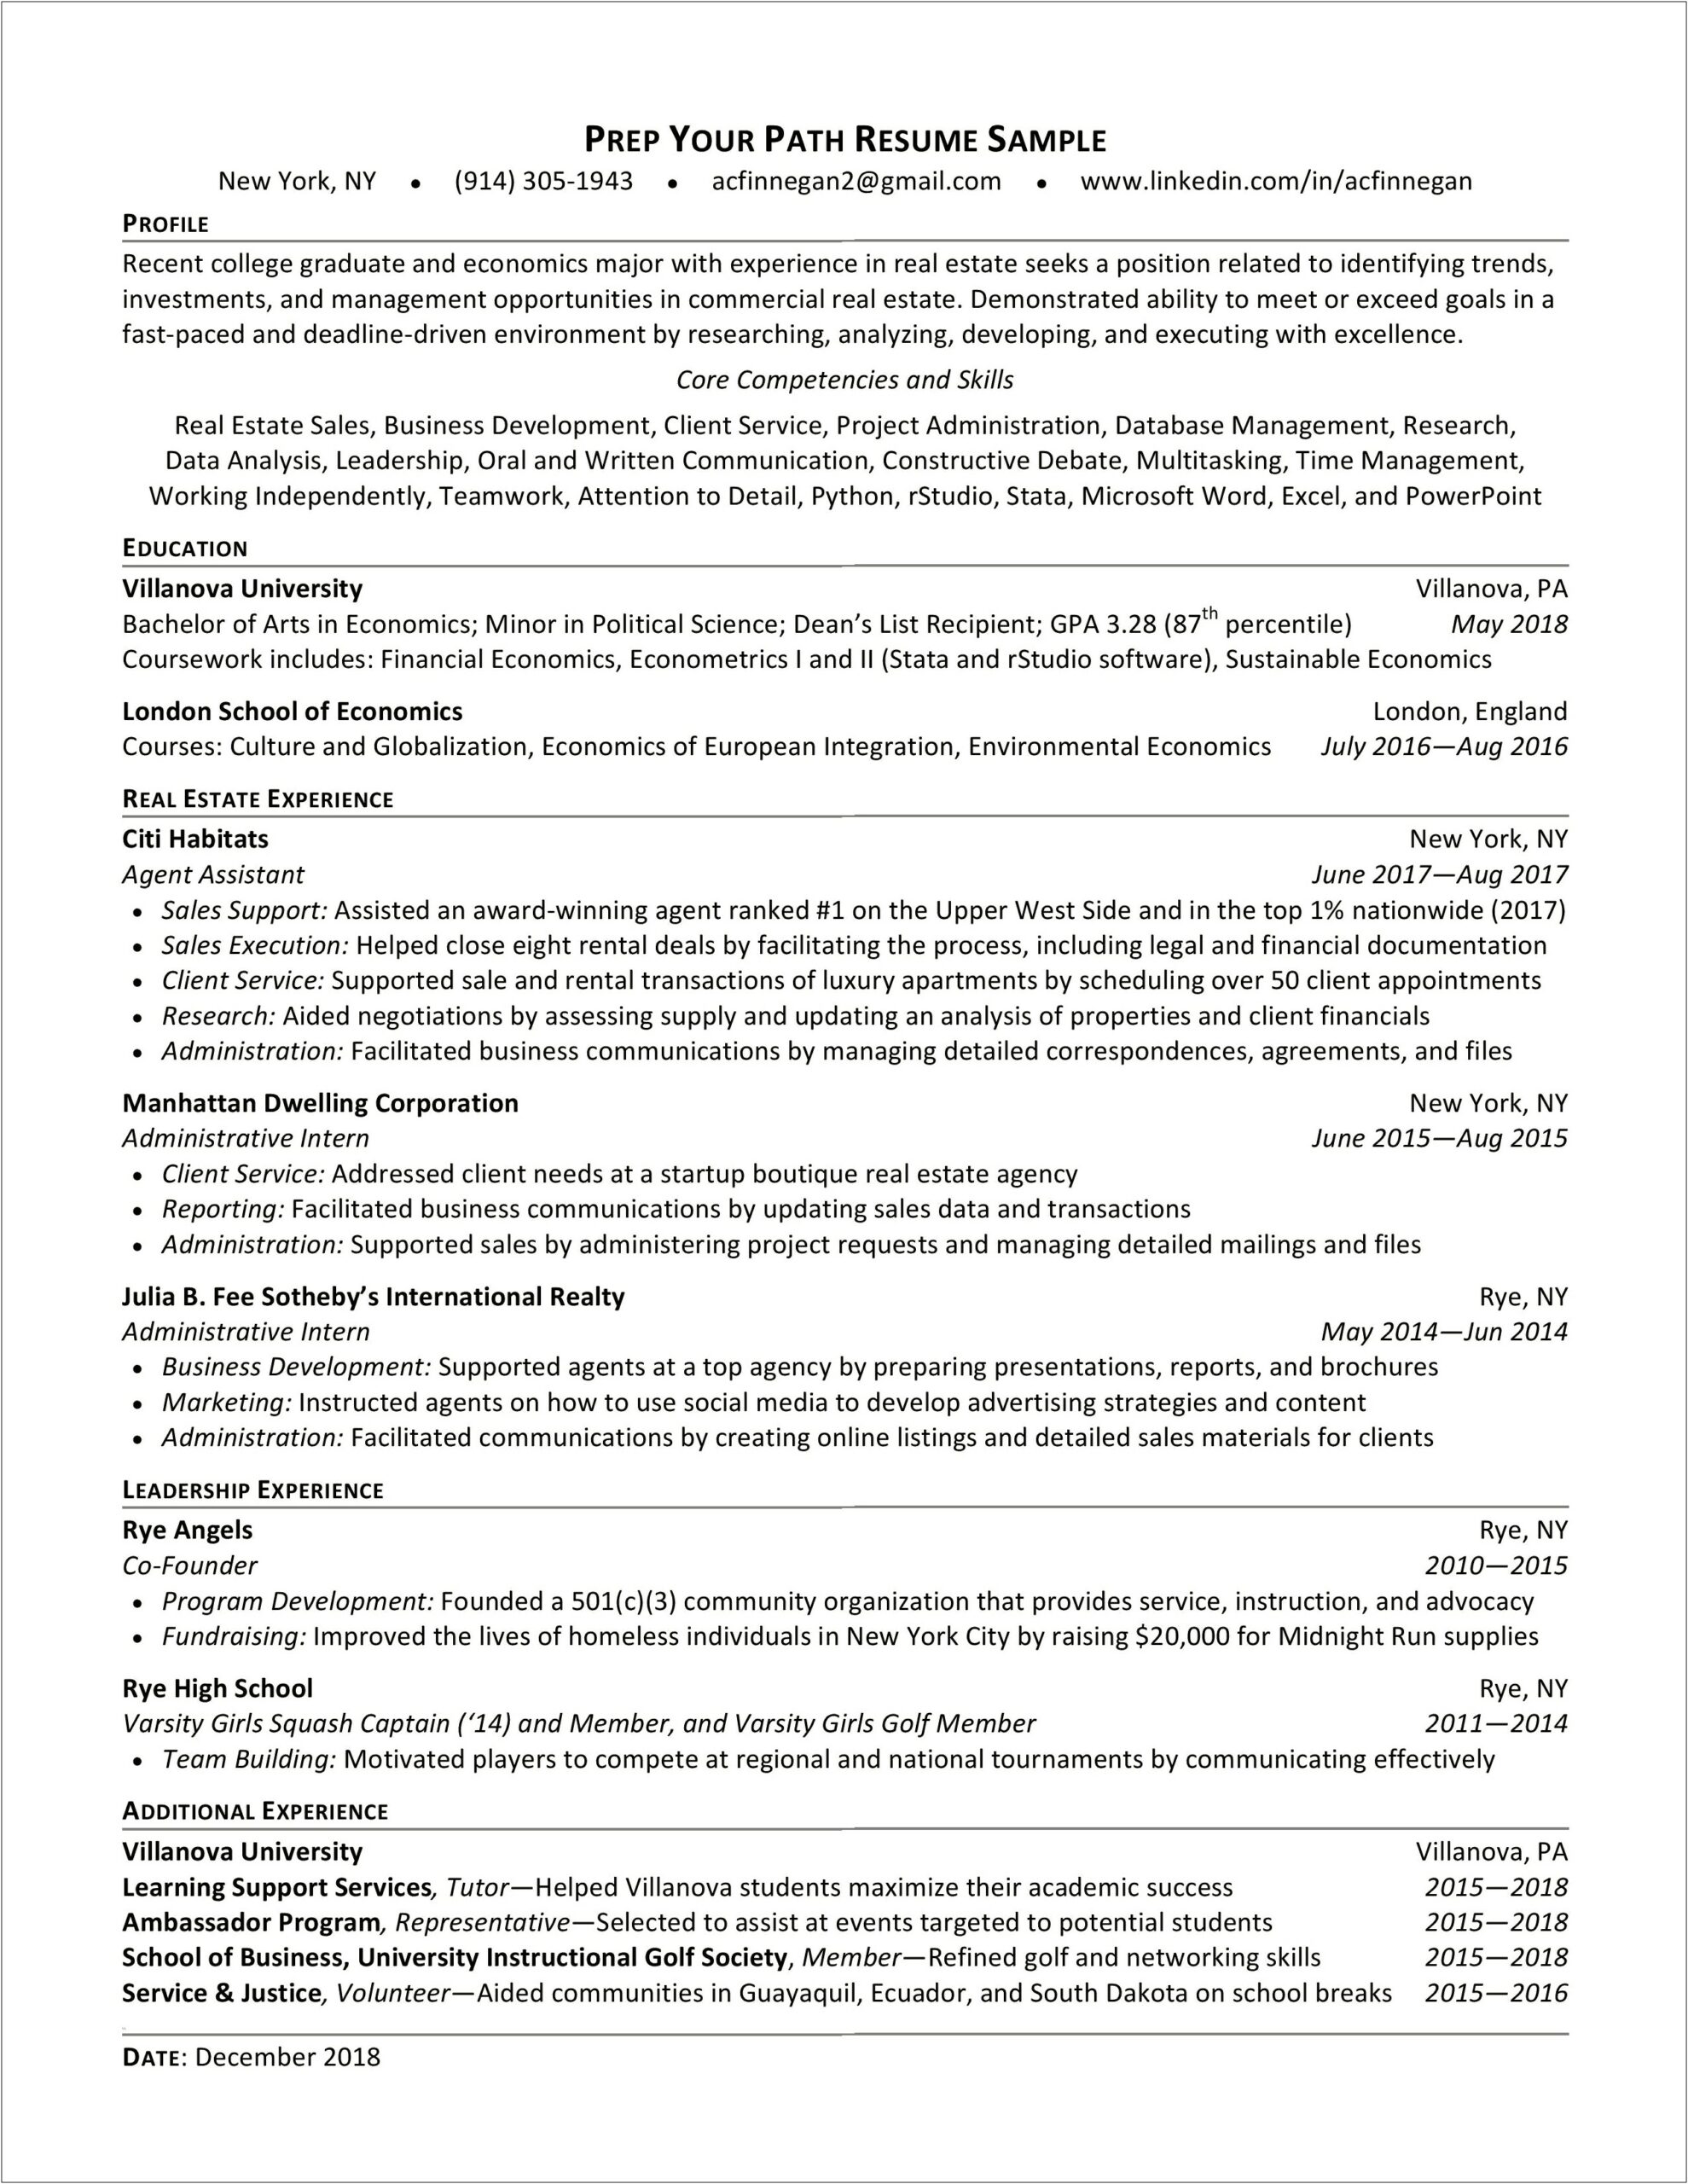 Resume Samples For Young Professionals